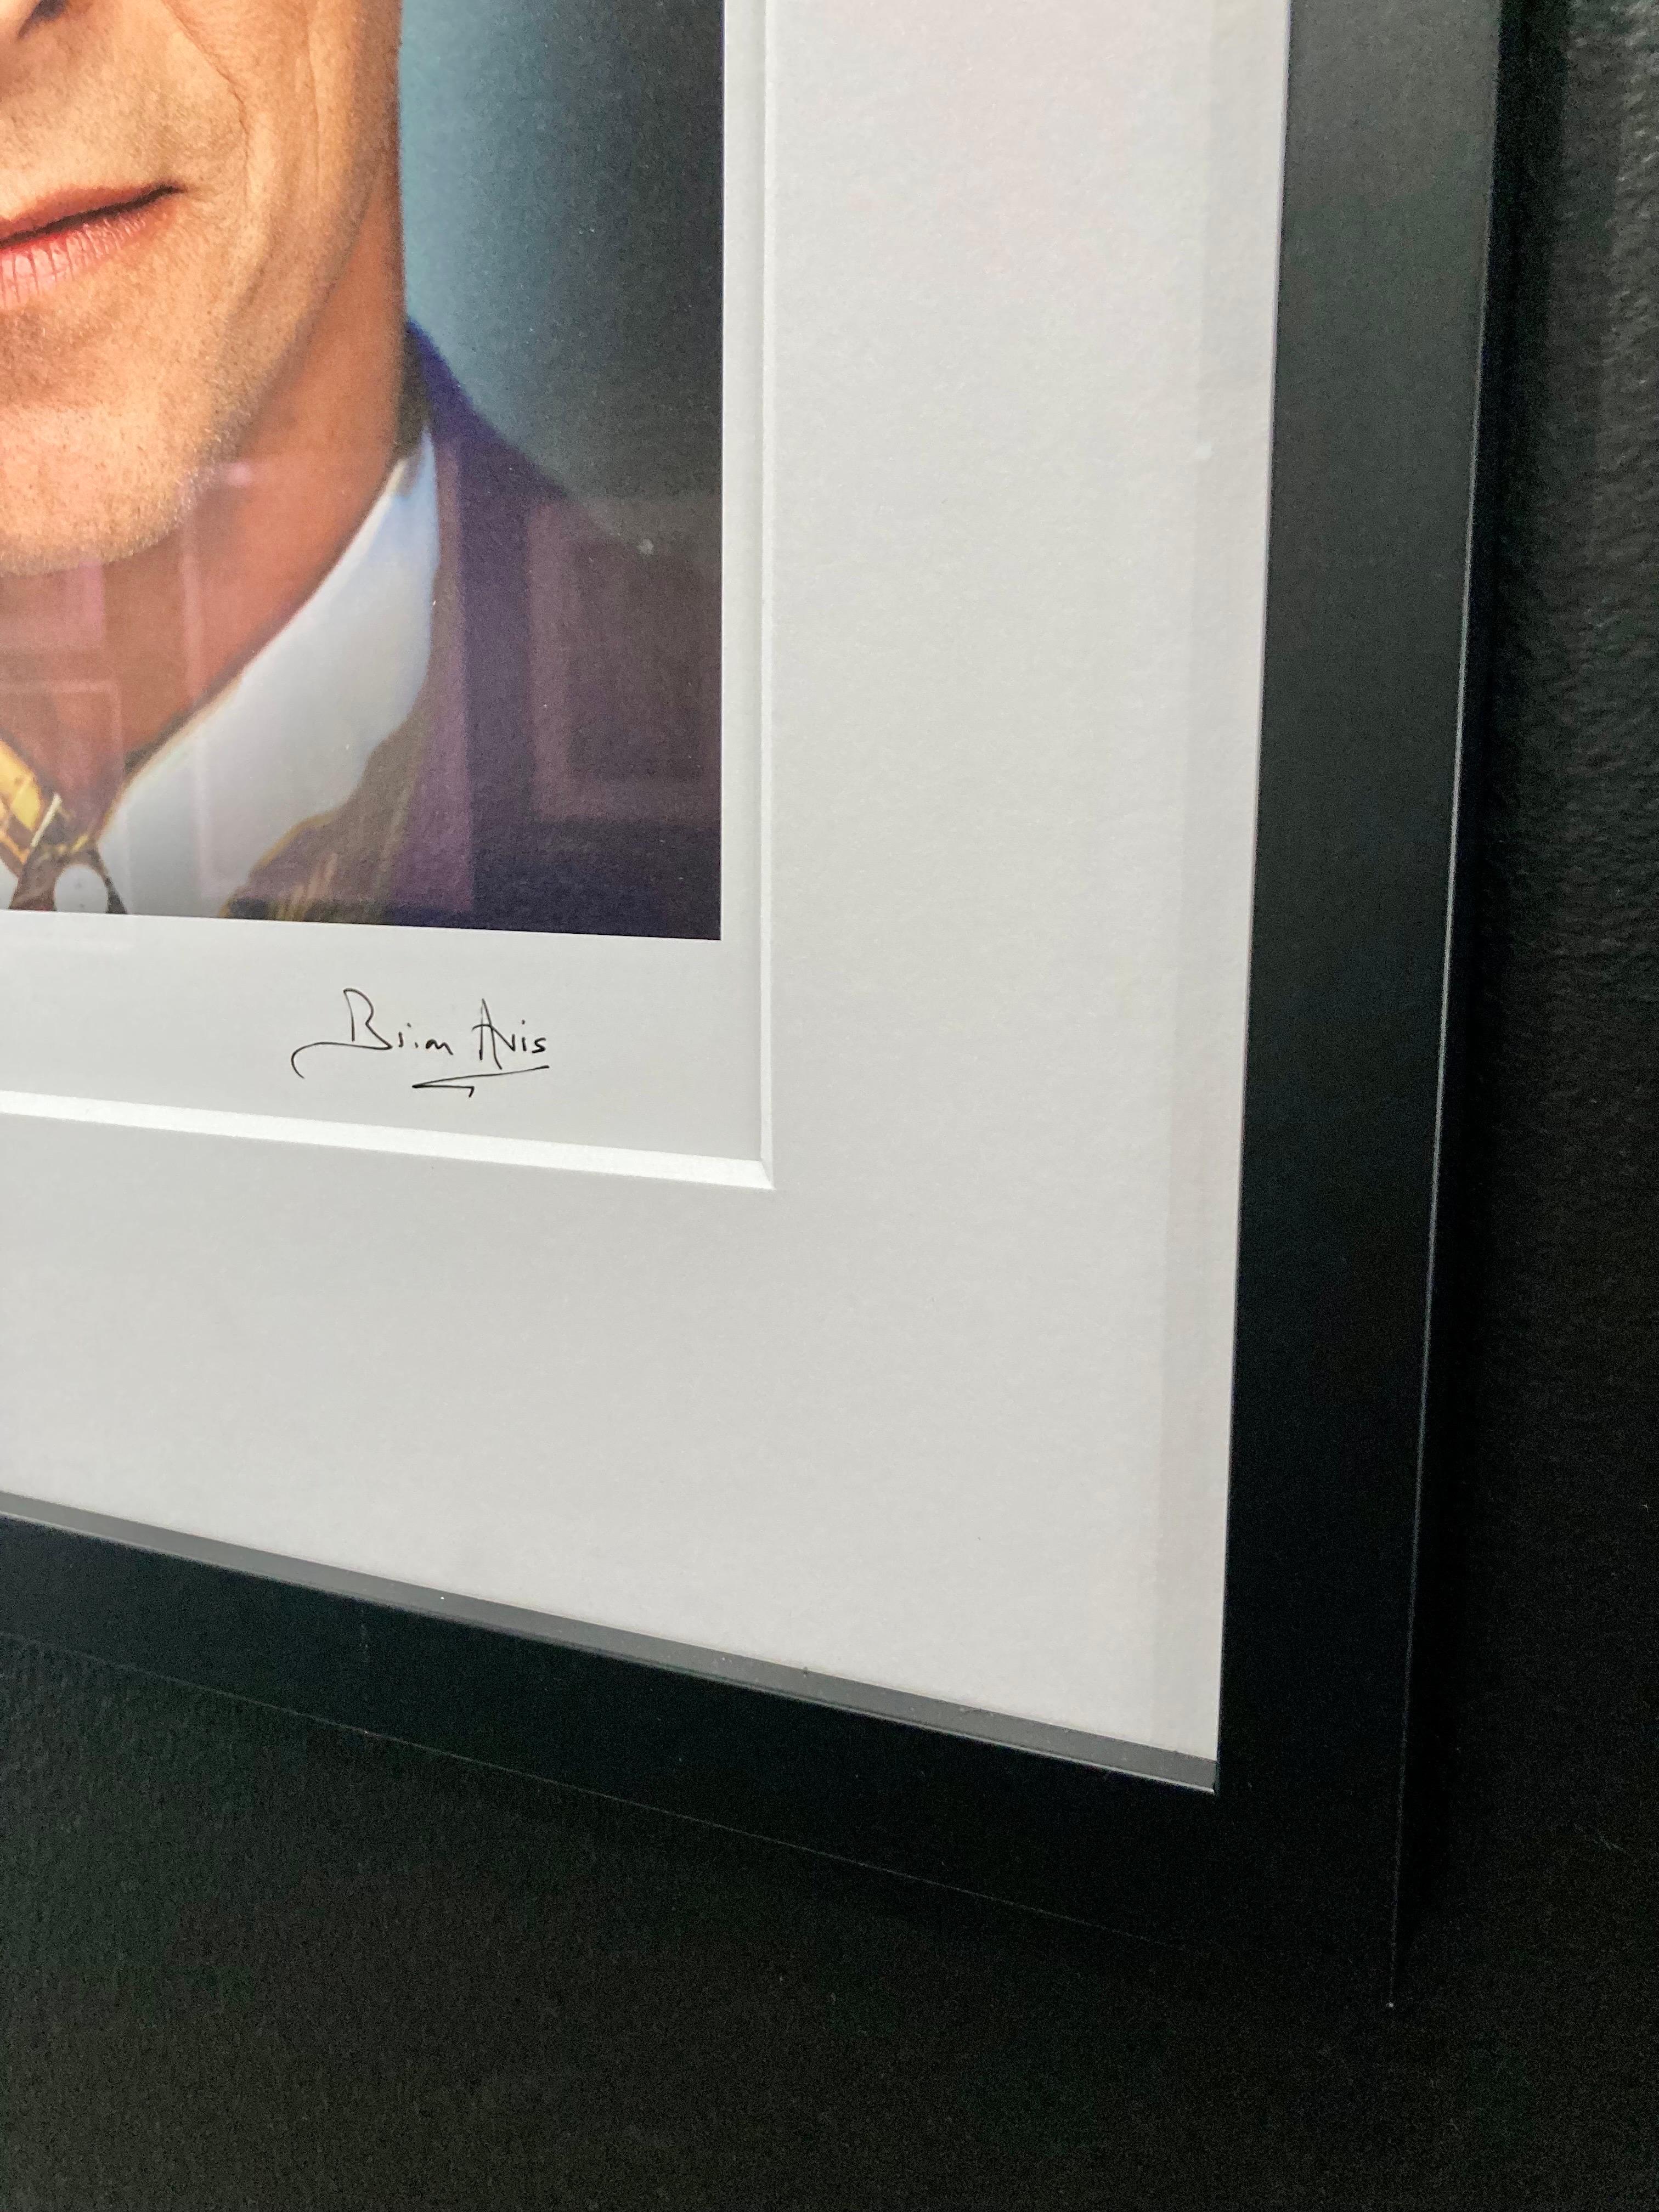 David Bowie portrait by Brian Aris, framed signed limited edition print For Sale 2